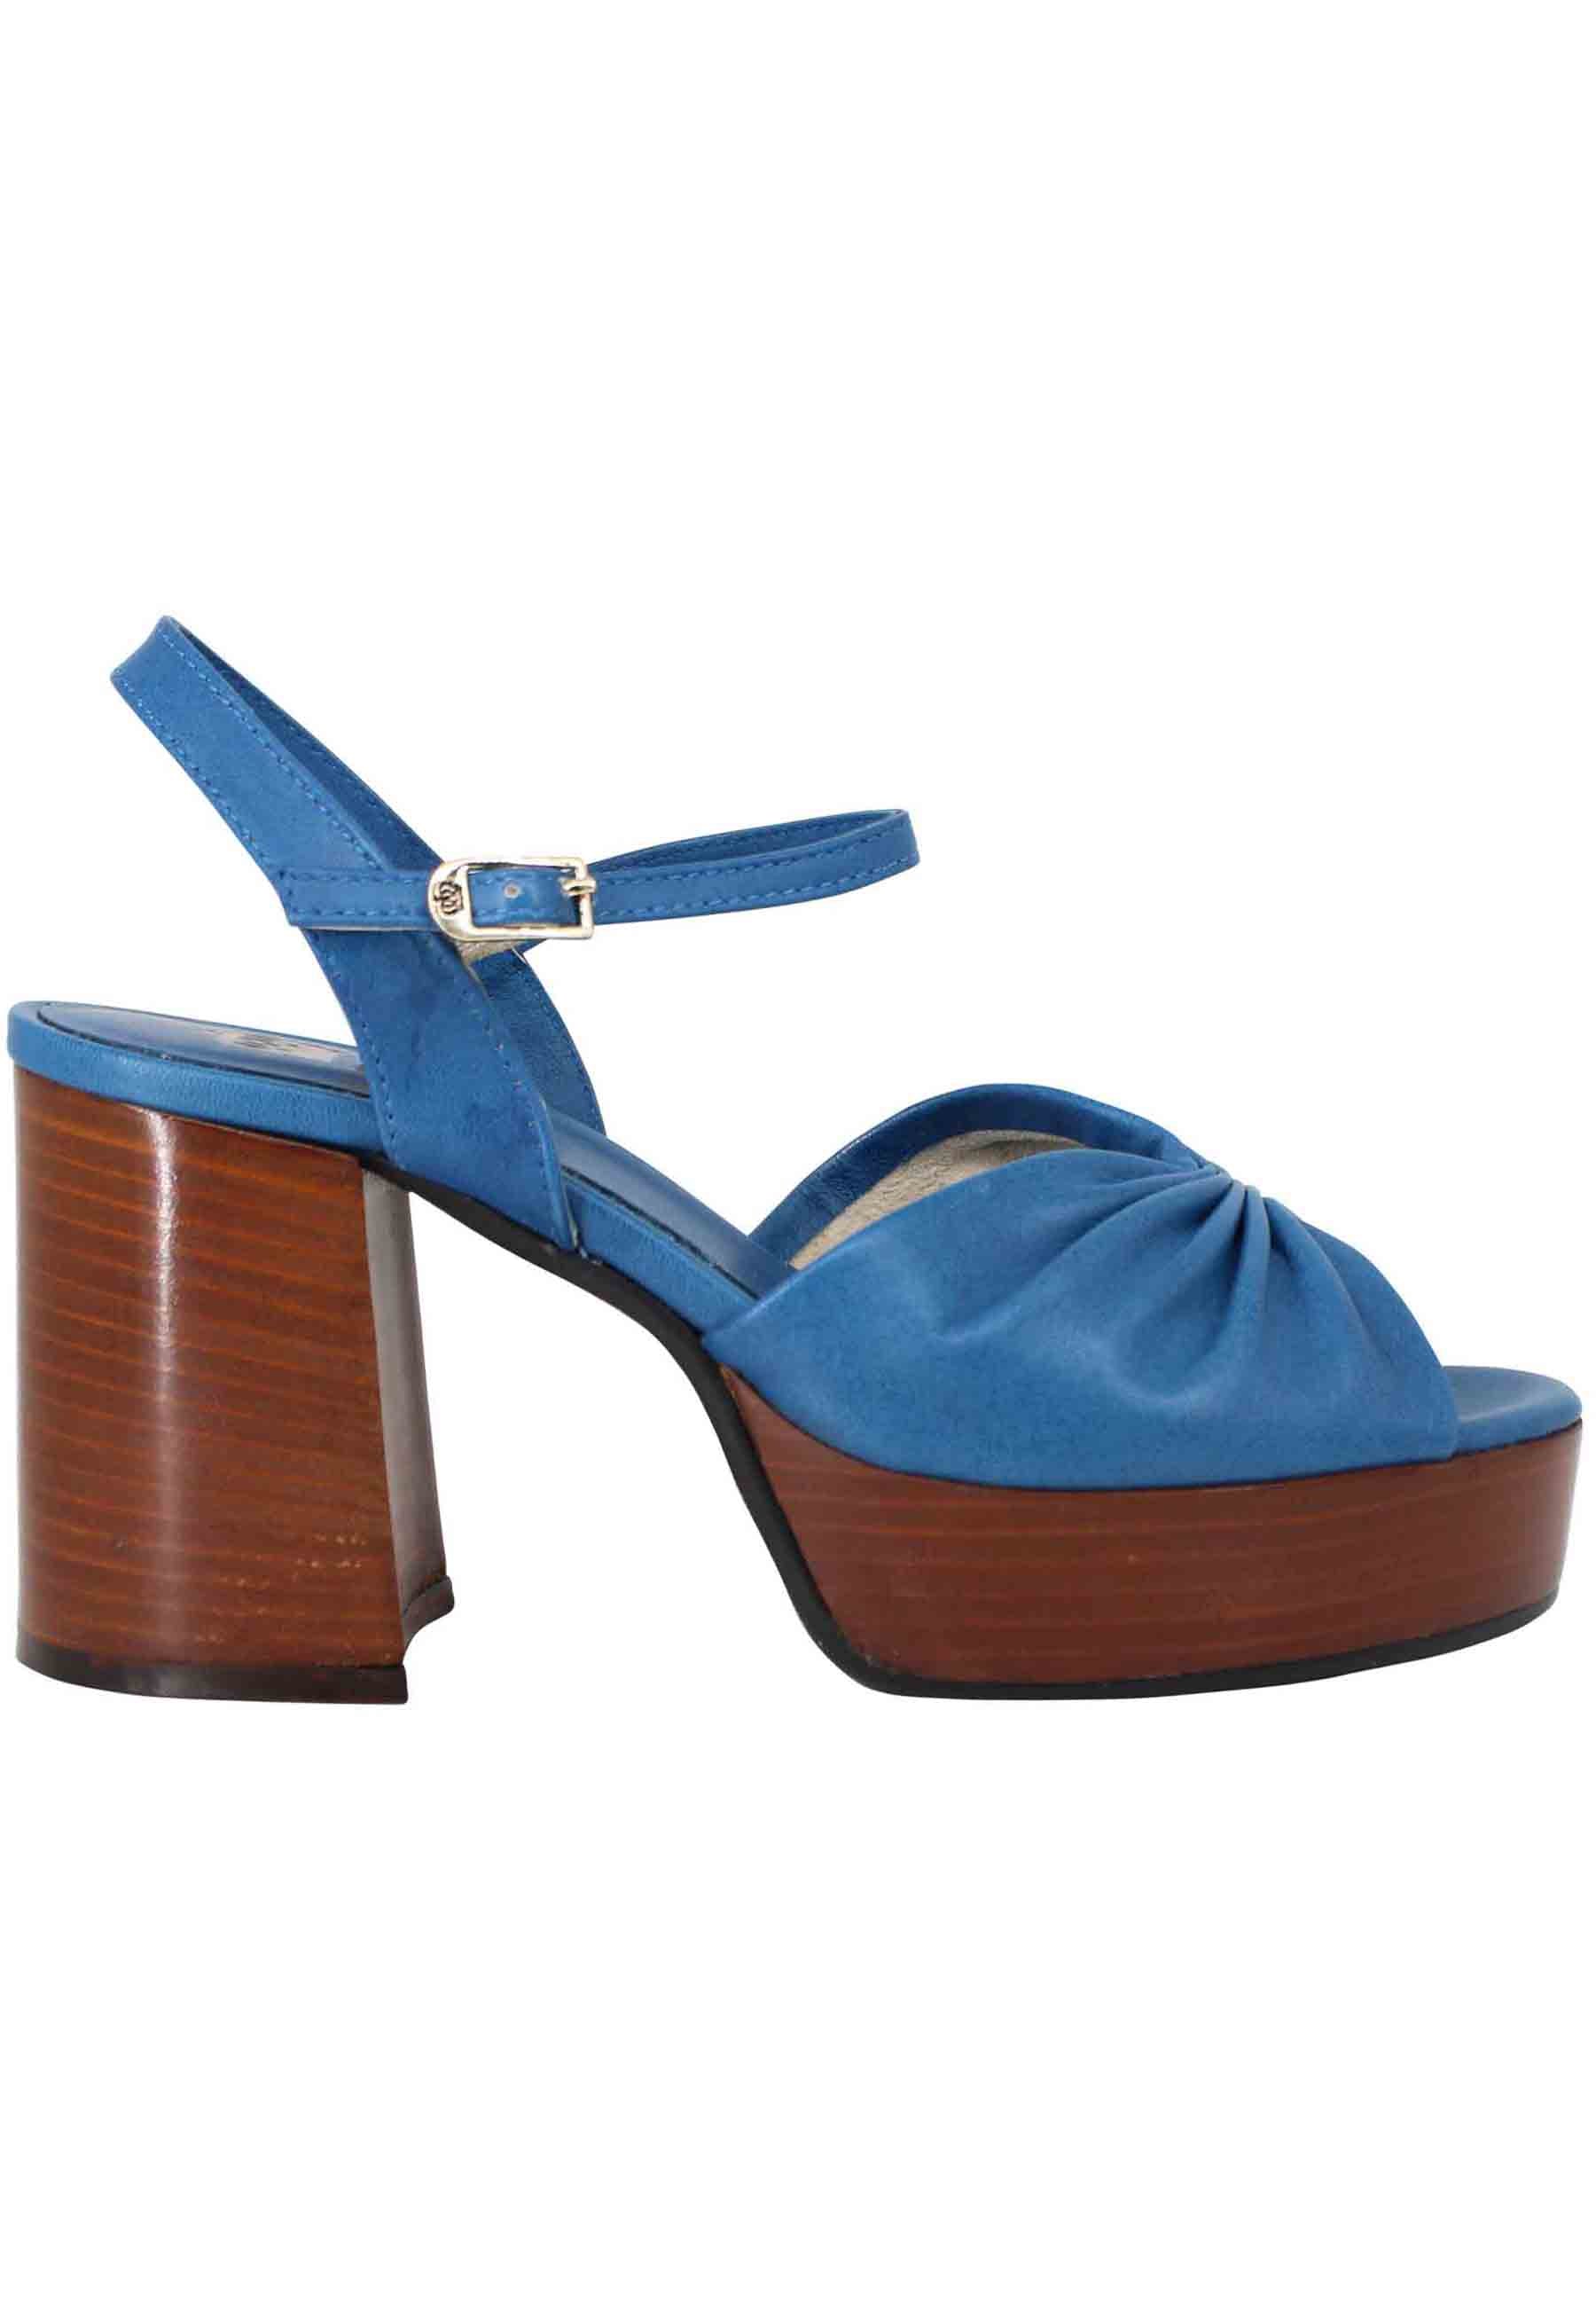 Women's blue leather sandals with leather heel and platform